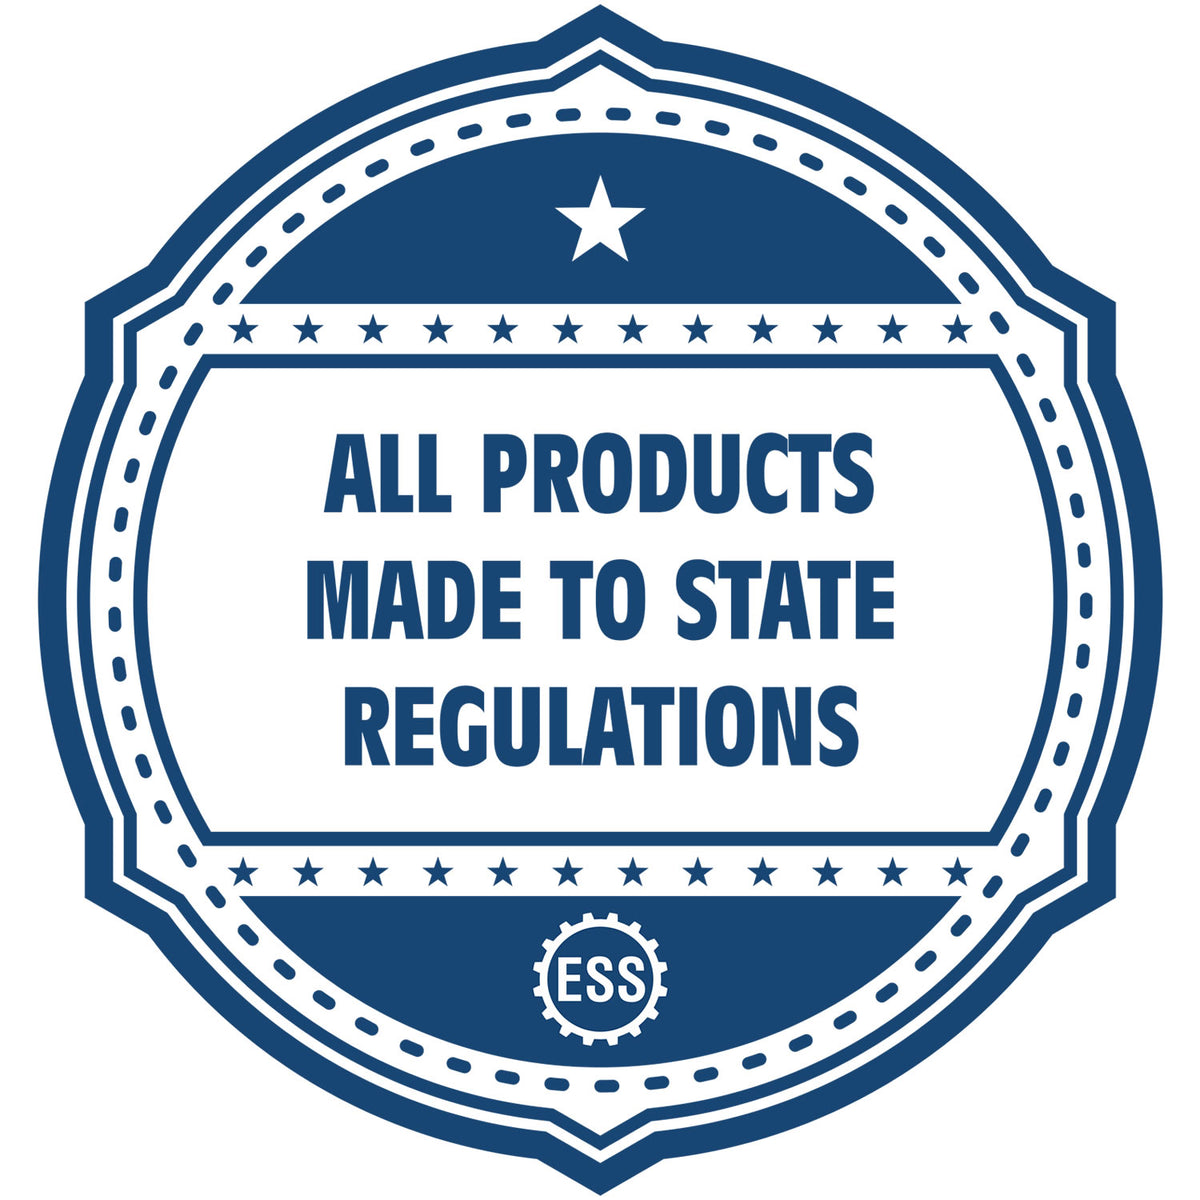 An icon or badge element for the Slim Pre-Inked State Seal Notary Stamp for Nebraska showing that this product is made in compliance with state regulations.